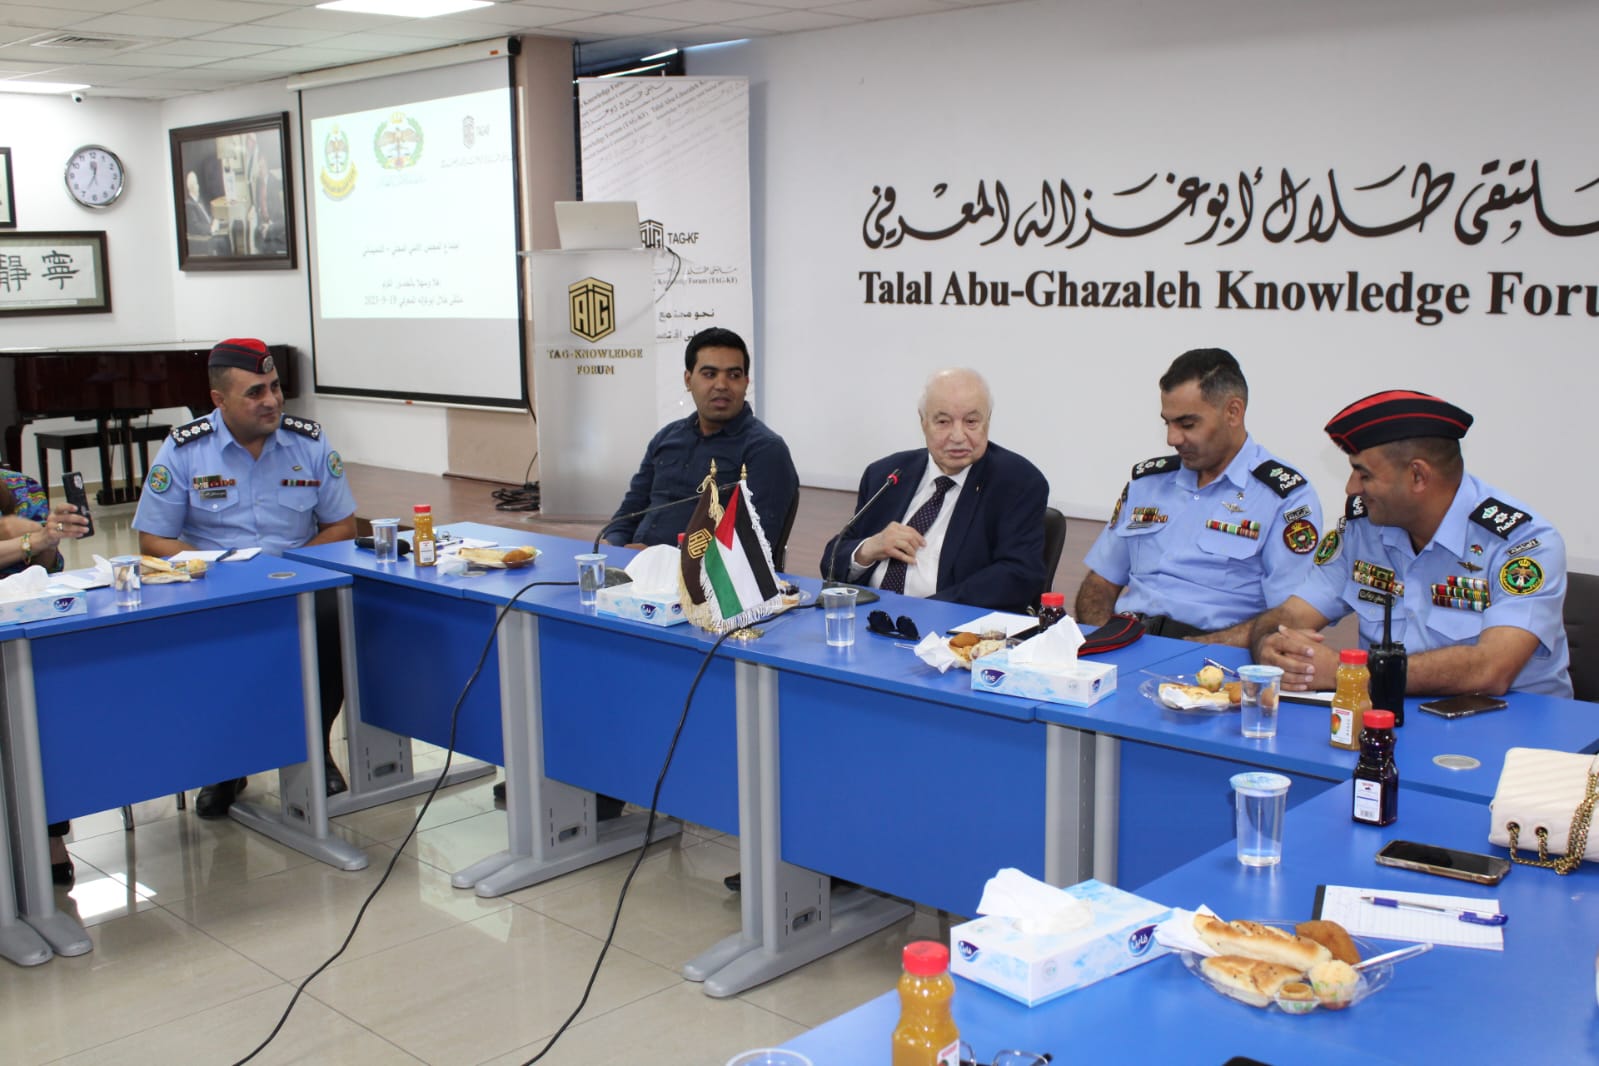 ‘Abu-Ghazaleh Knowledge Forum’ Hosts Annual Meeting of Shmeisani District’s Local Security Council 